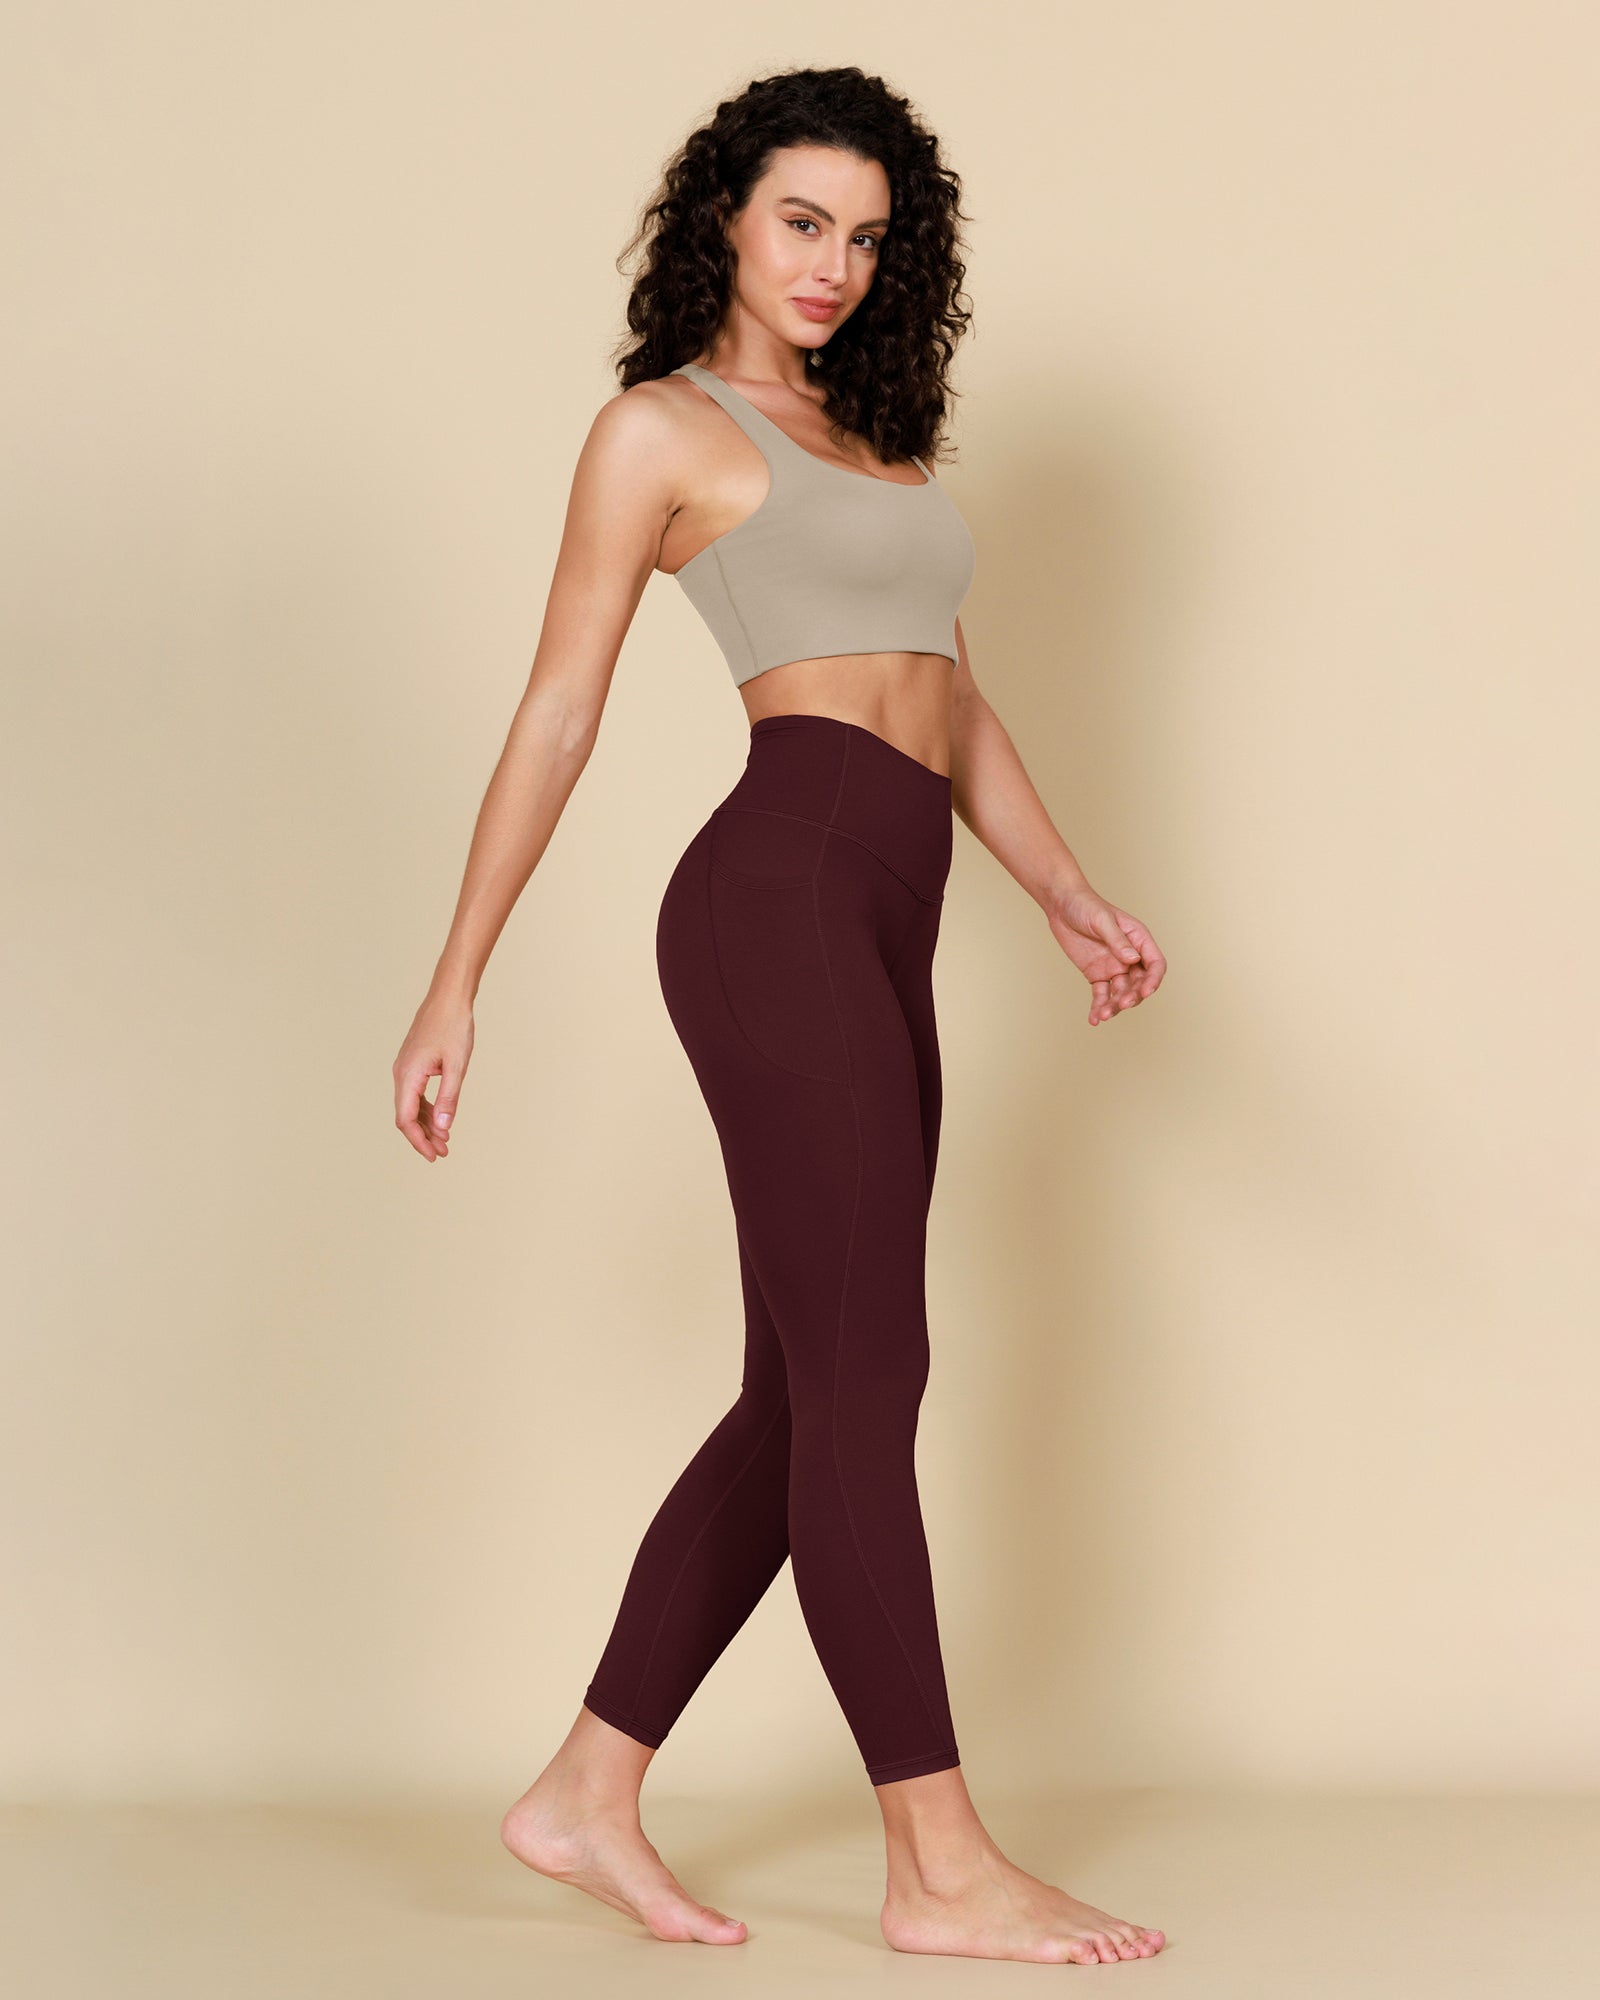 ODCLOUD 2-Pack 7/8 Buttery Soft Lounge Yoga Leggings with Pockets Black+Burgundy - ododos